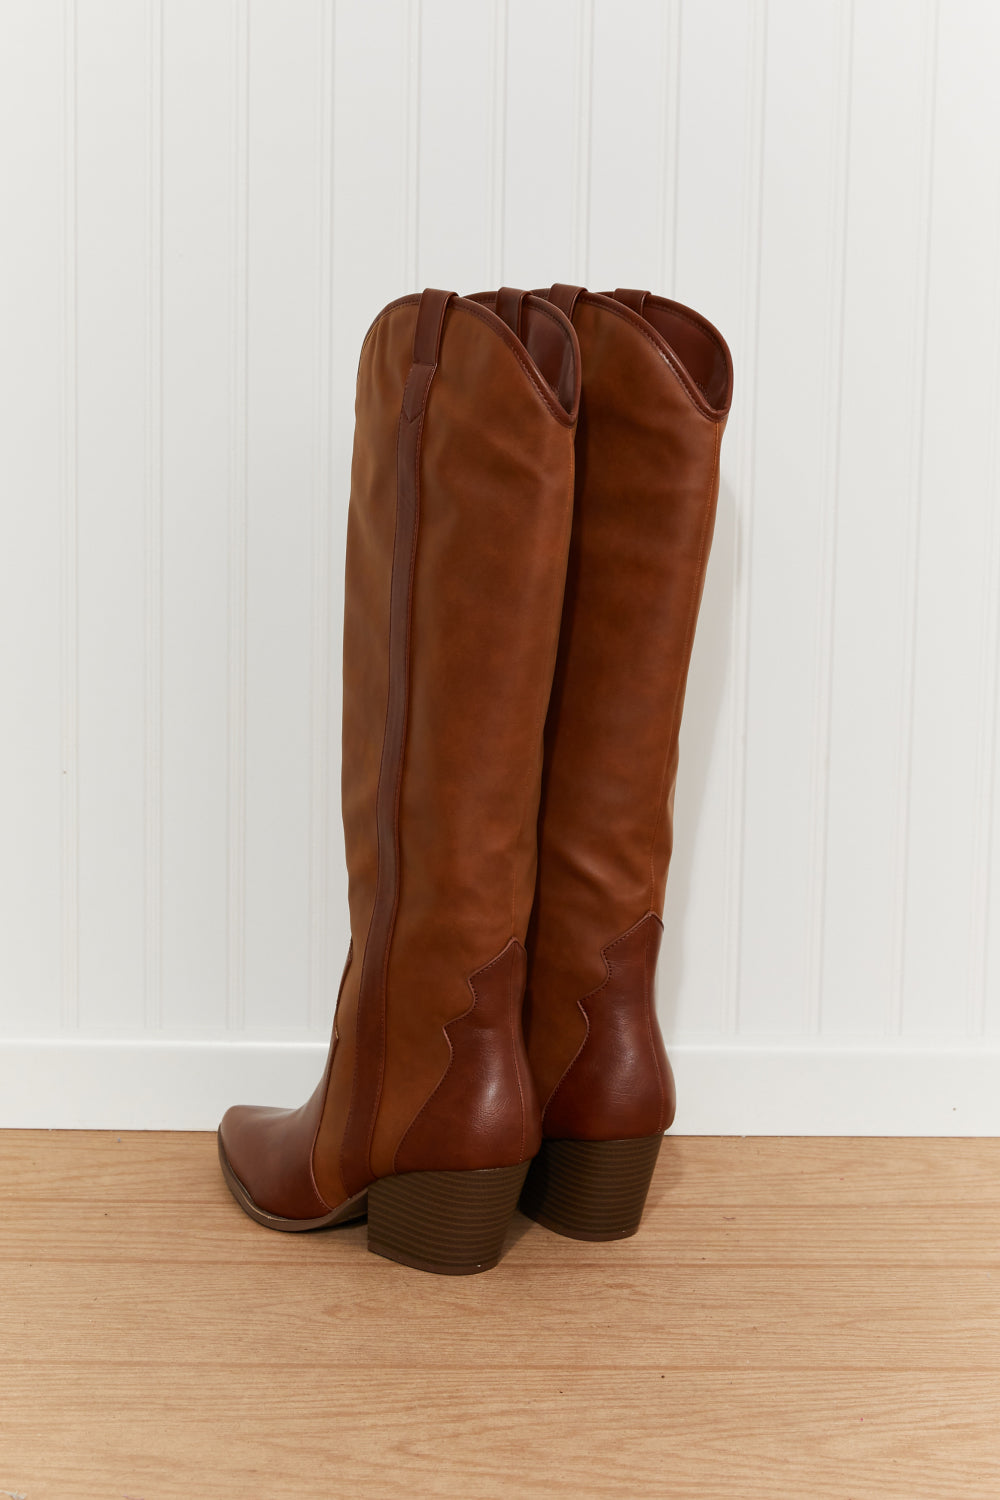 Qupid Countryside Contrast Knee High Cowboy Boots